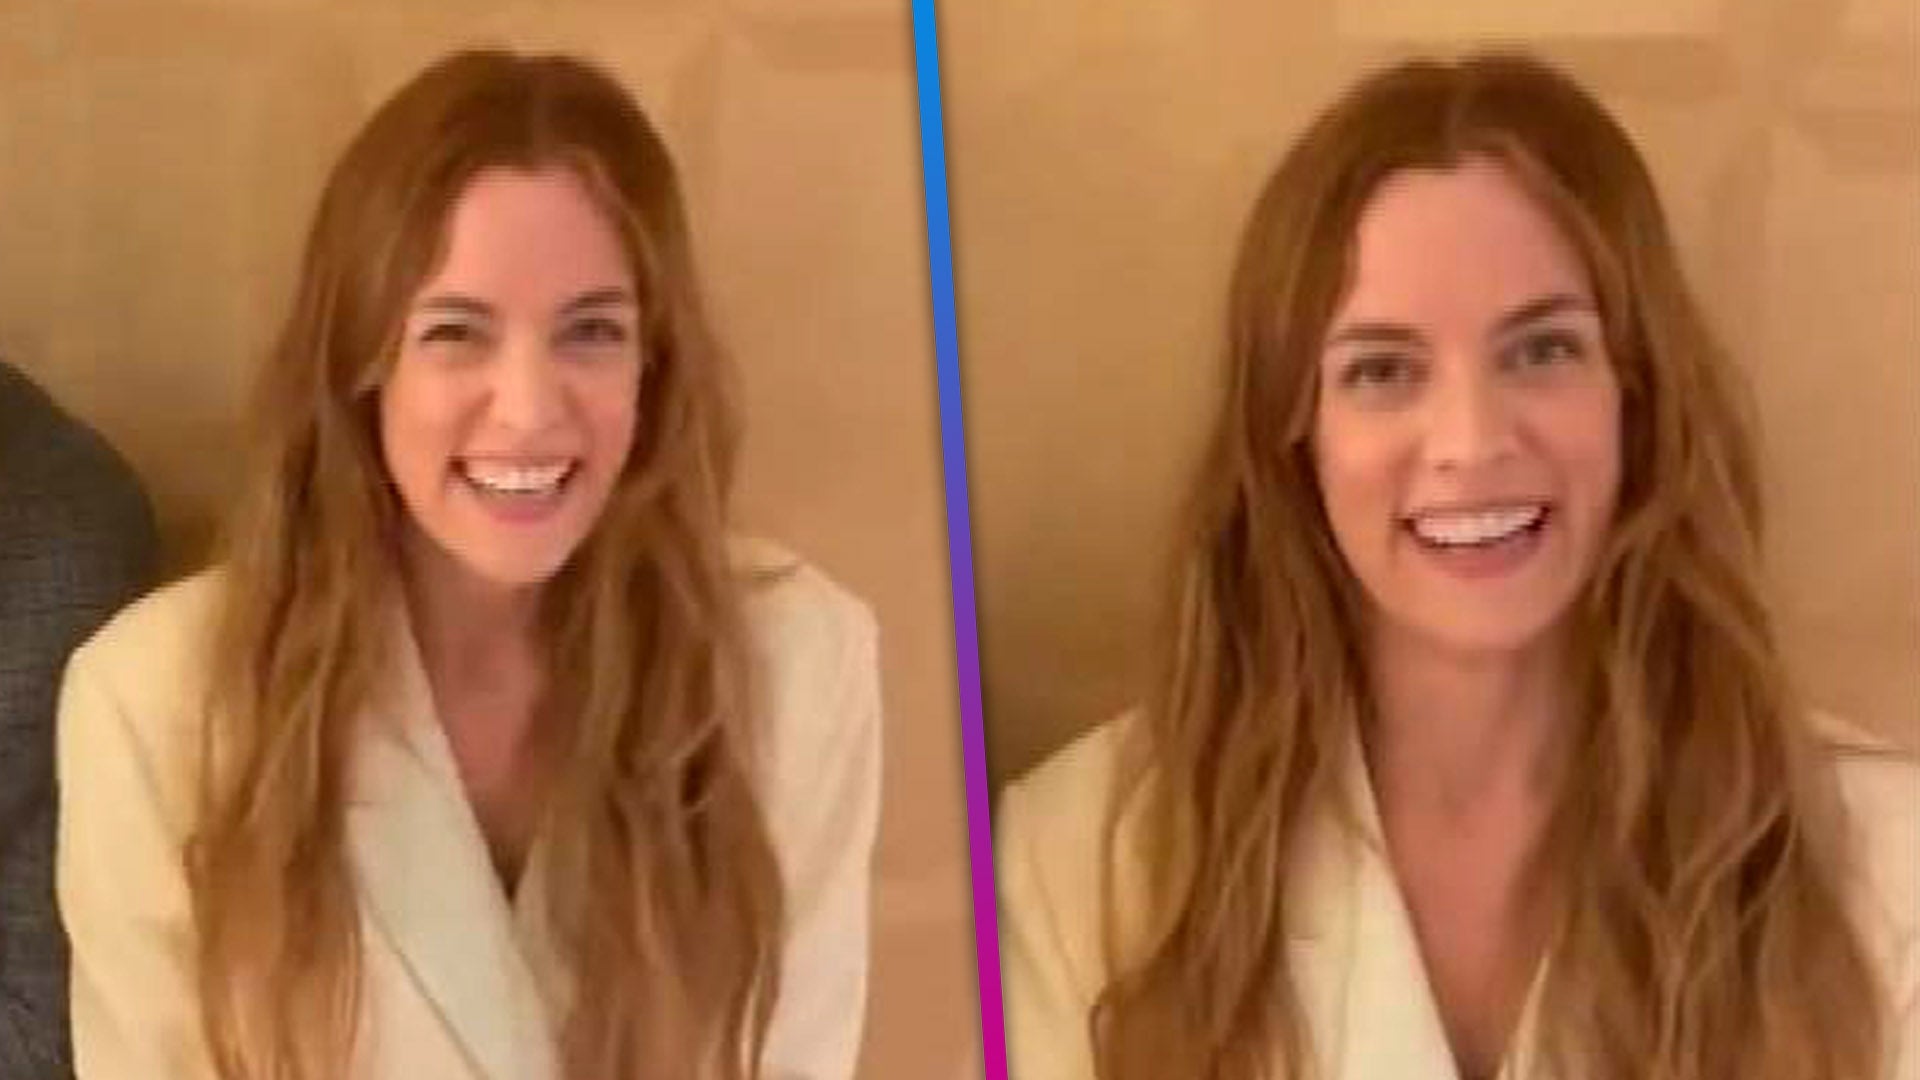 Riley Keough Beams in First TikTok 1 Month After Lisa Marie Presley’s Death